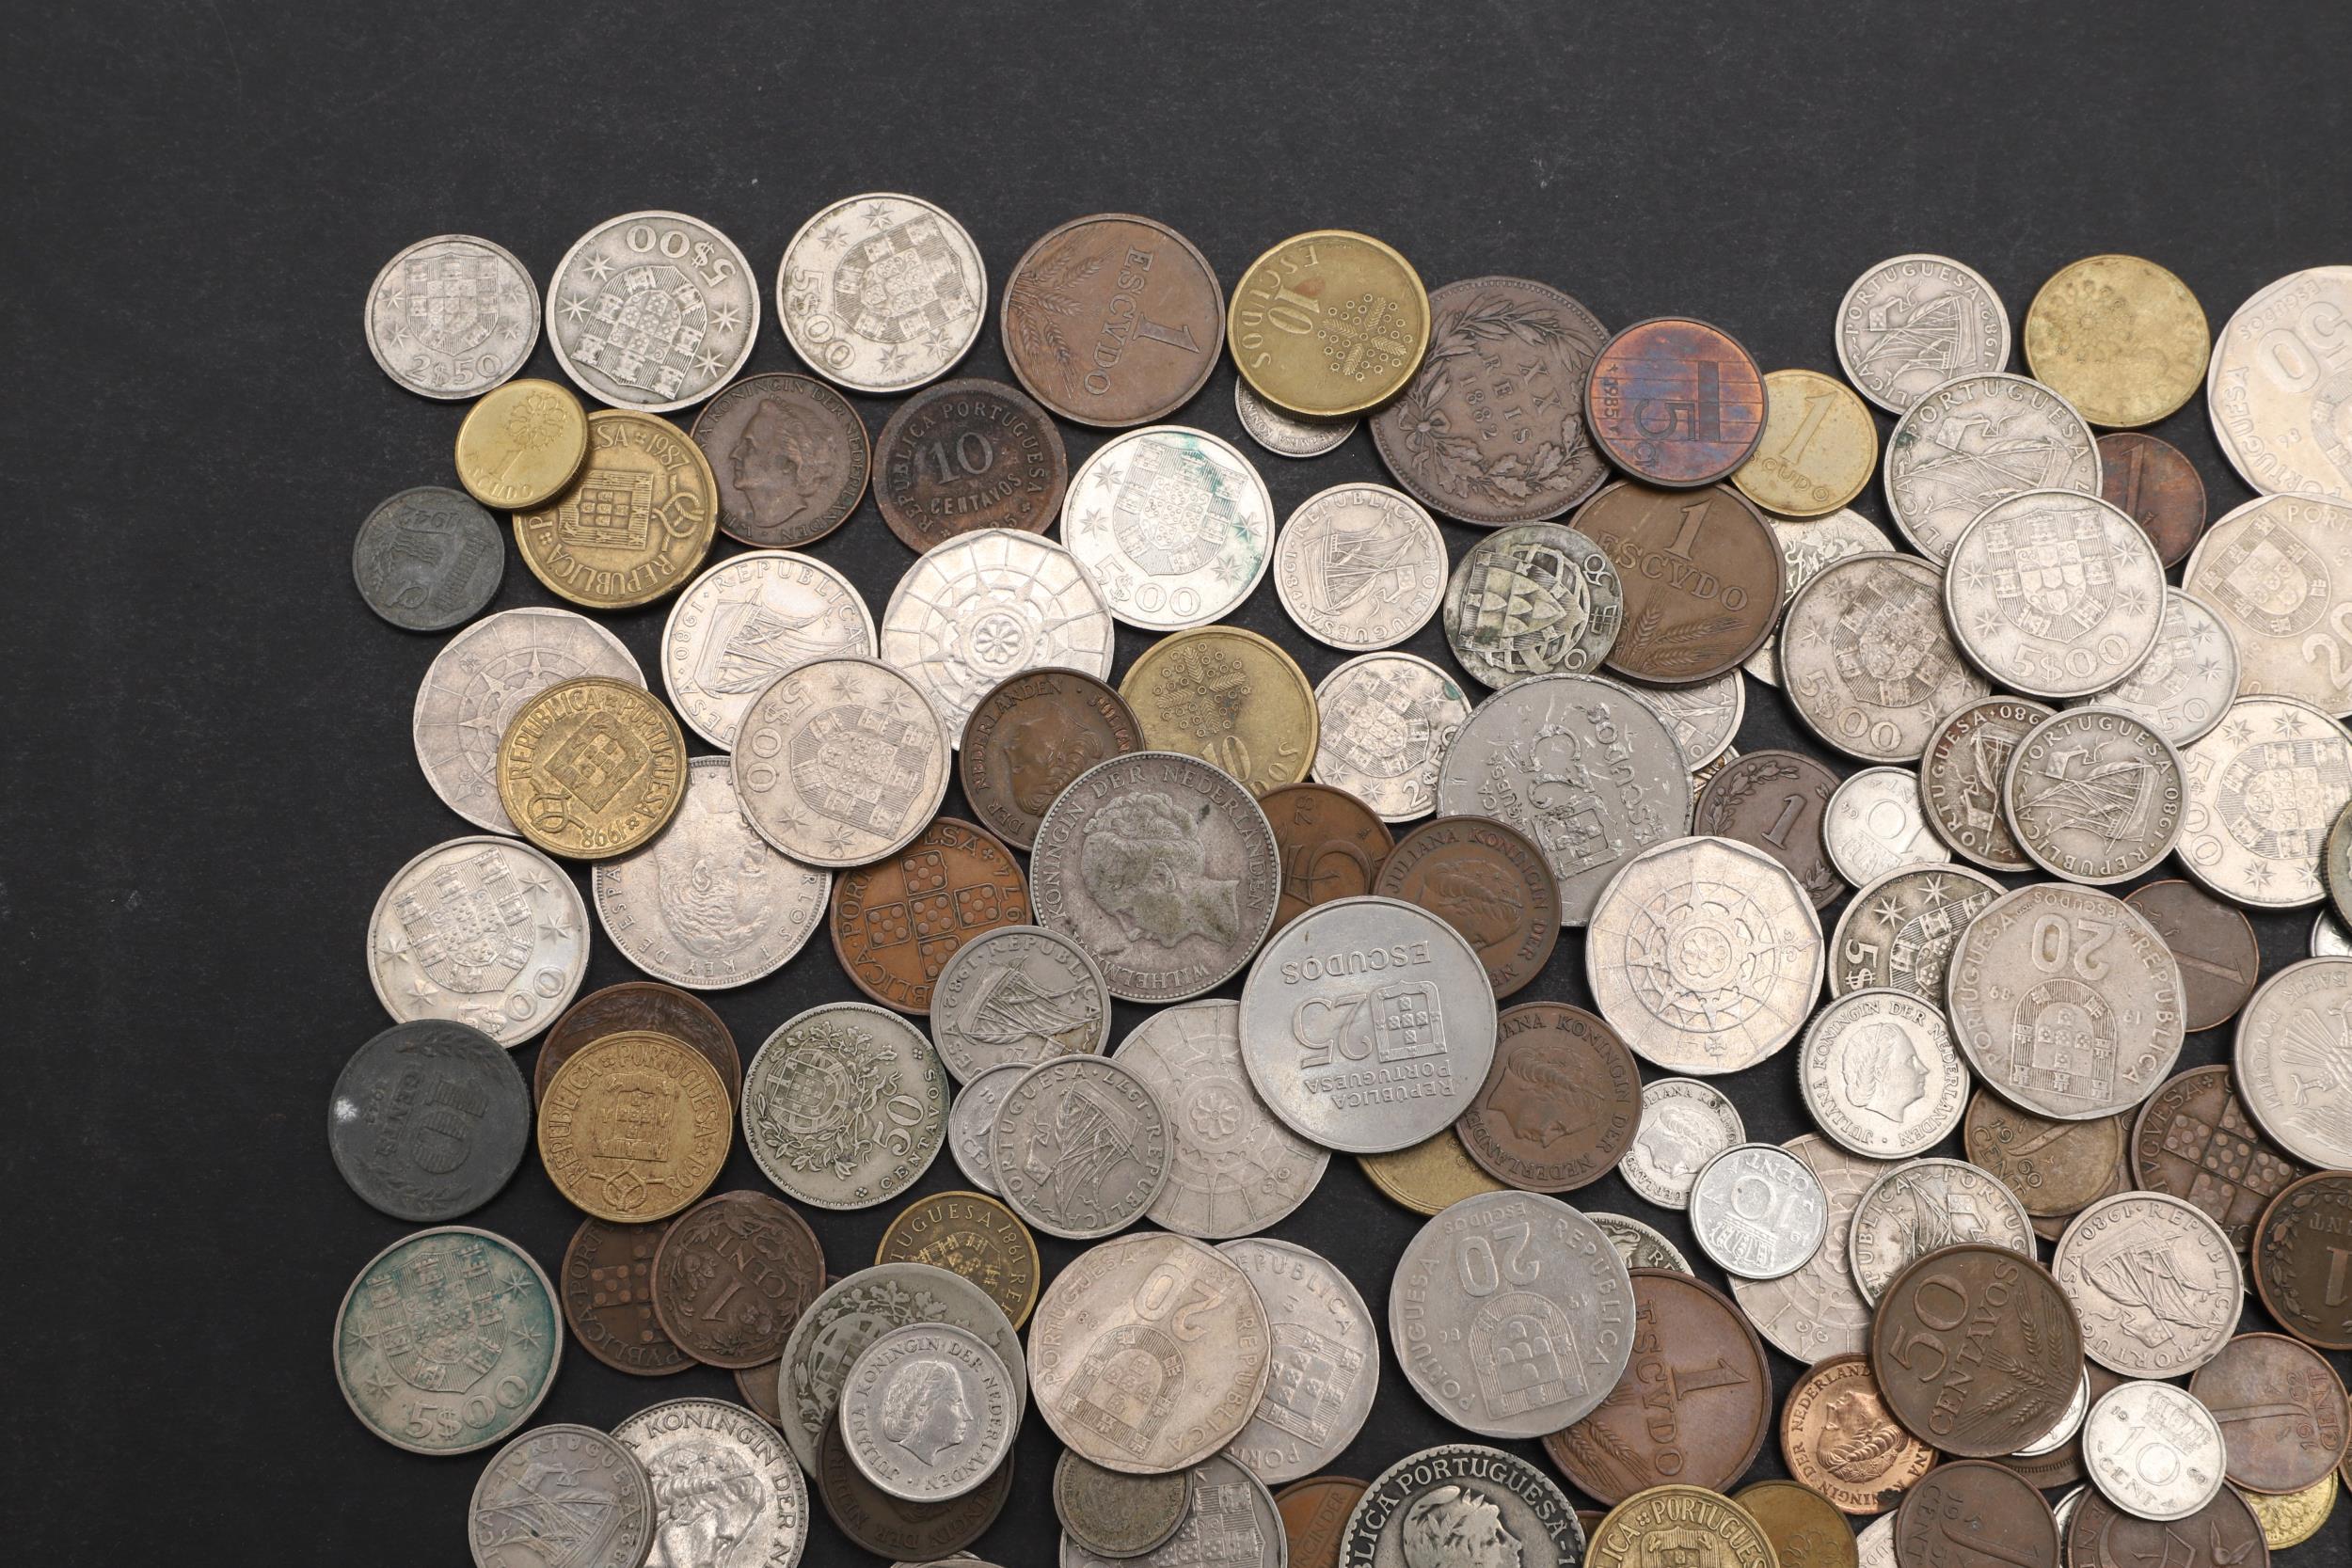 A MIXED COLLECTION OF PORTUGUESE, DUTCH AND OTHER WORLD COINS. - Image 2 of 5